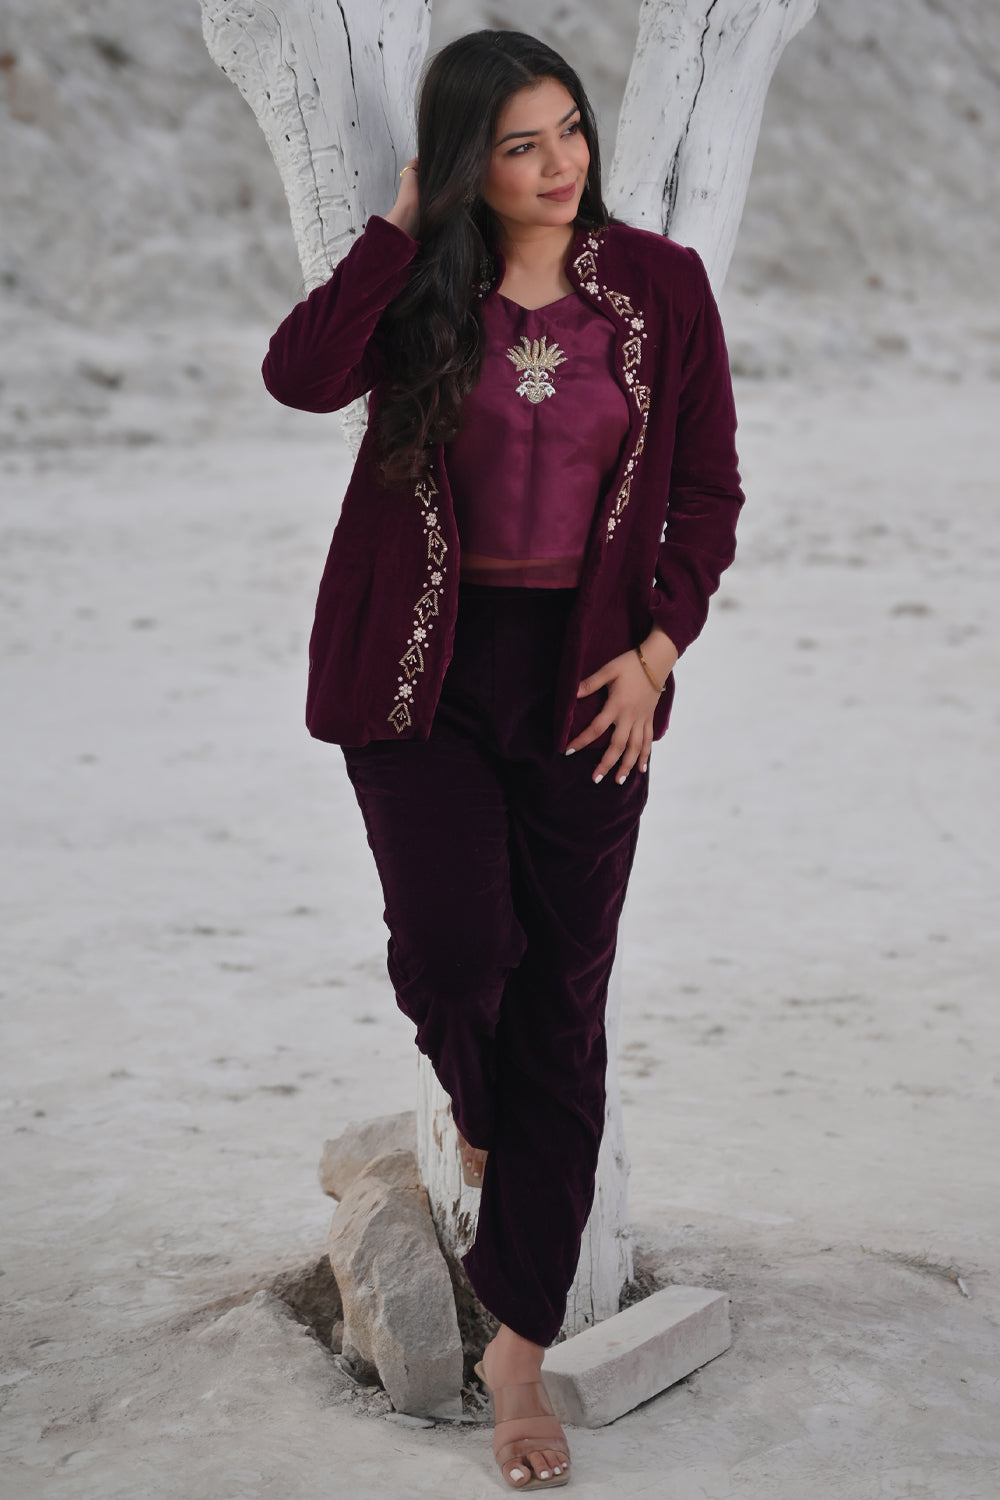 Unique Scarlet Velvet Blazer, Top & Pant 3 Piece Set in Wine | Made To Order. Perfect for Winter!